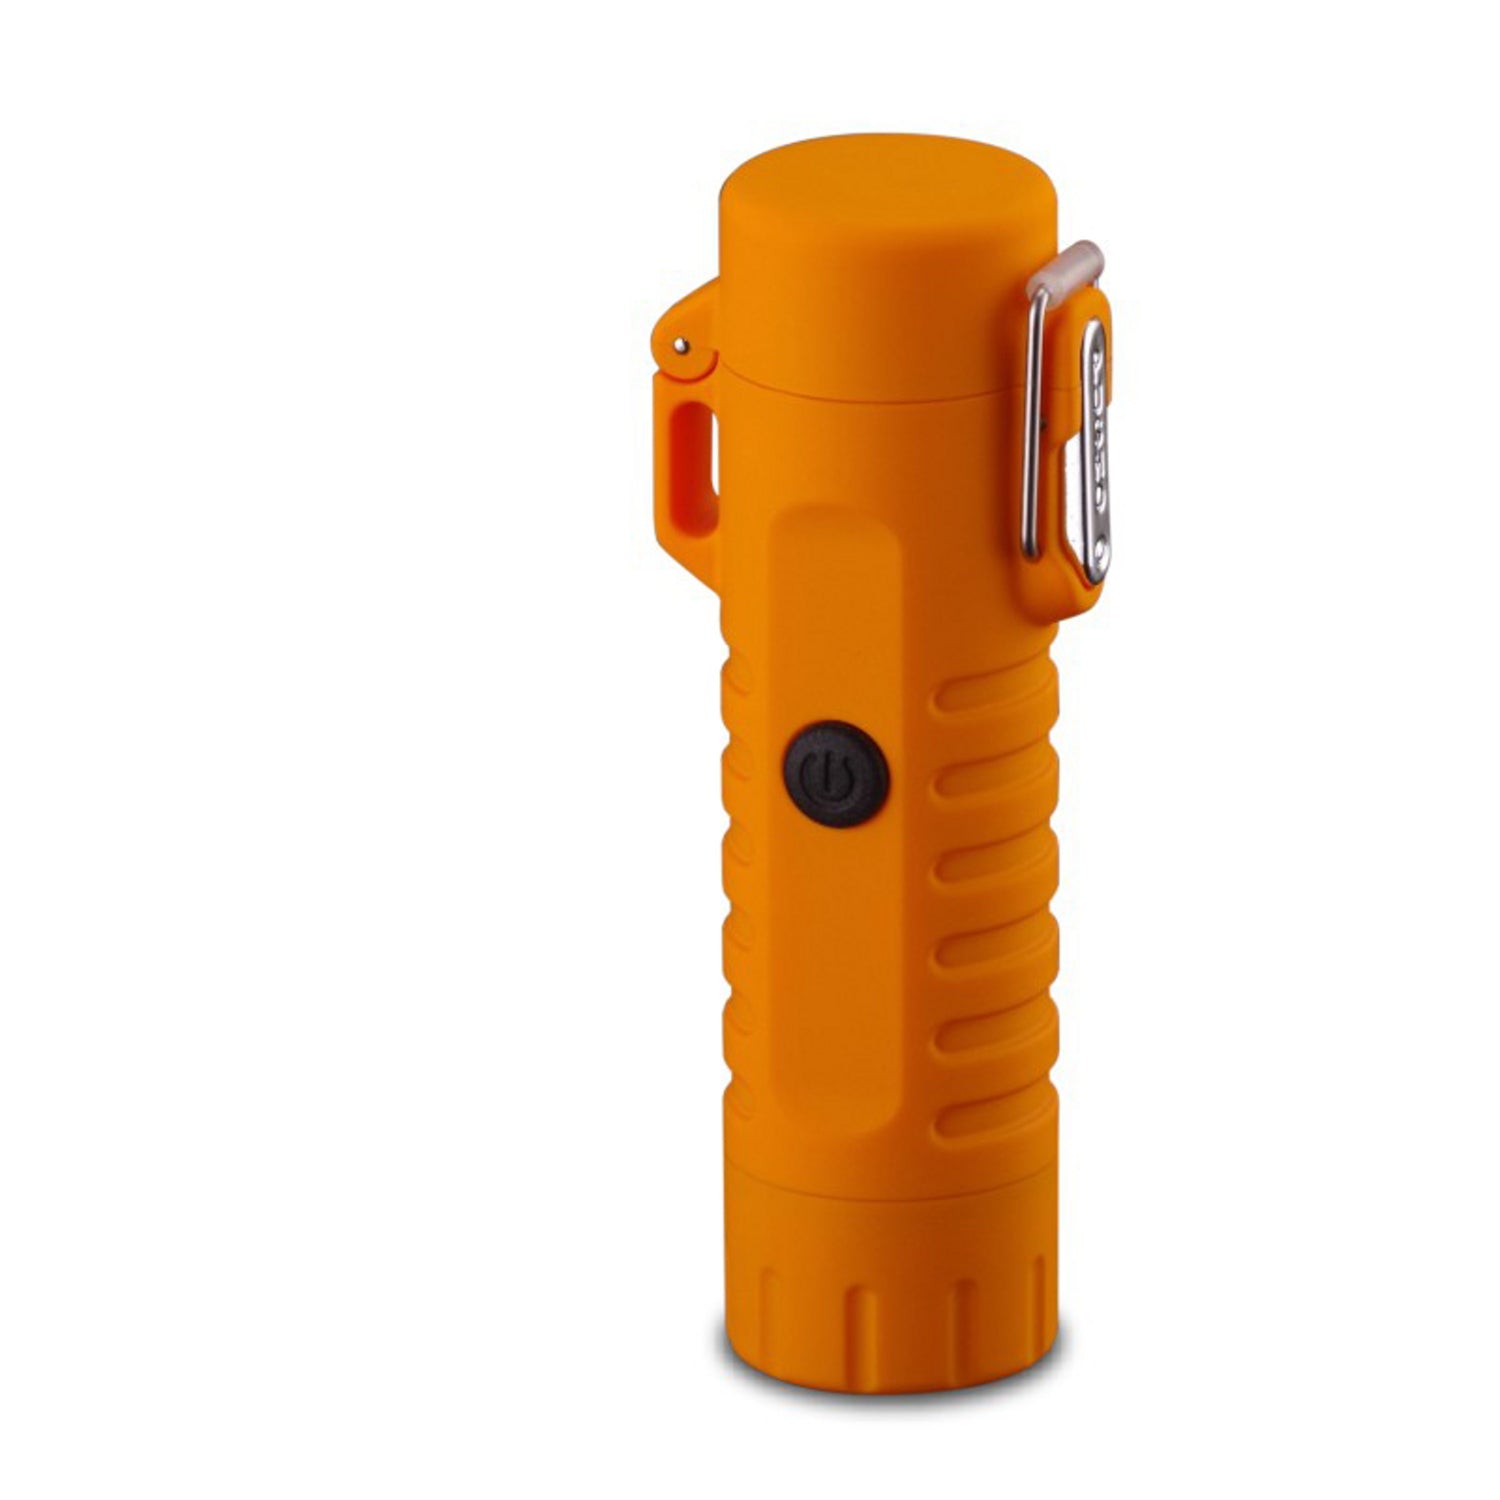 Tactical Waterproof Dual Arc Lighter- 5 colours Available